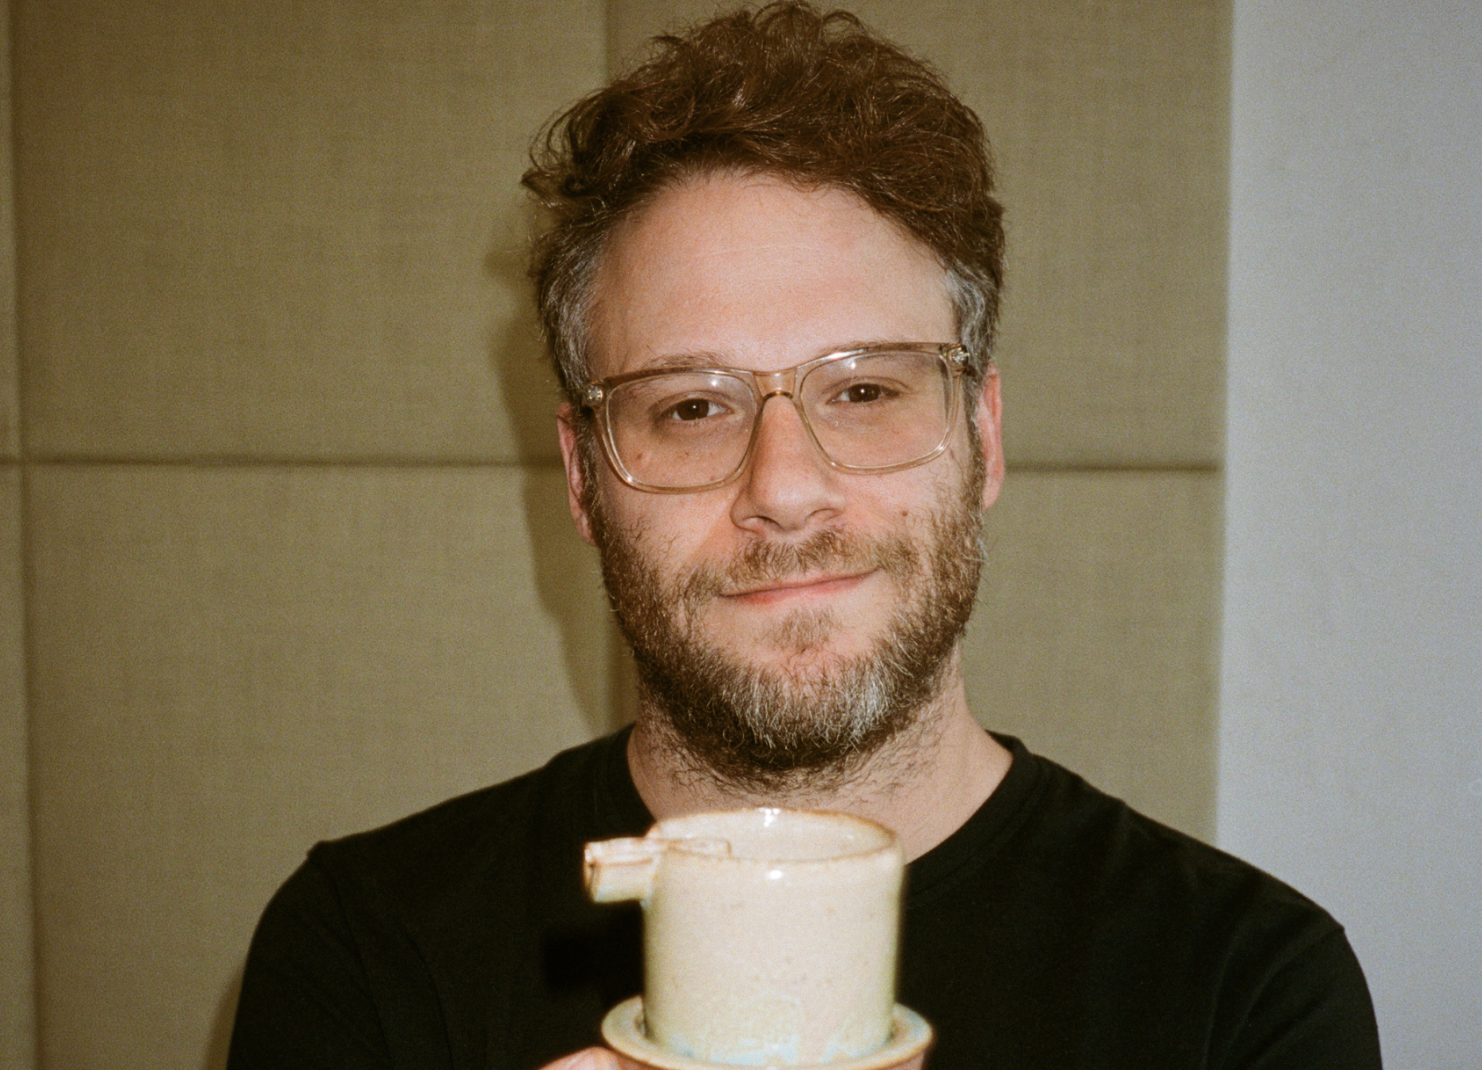 While searching for the perfect place to rest his joints, Seth Rogen began ...